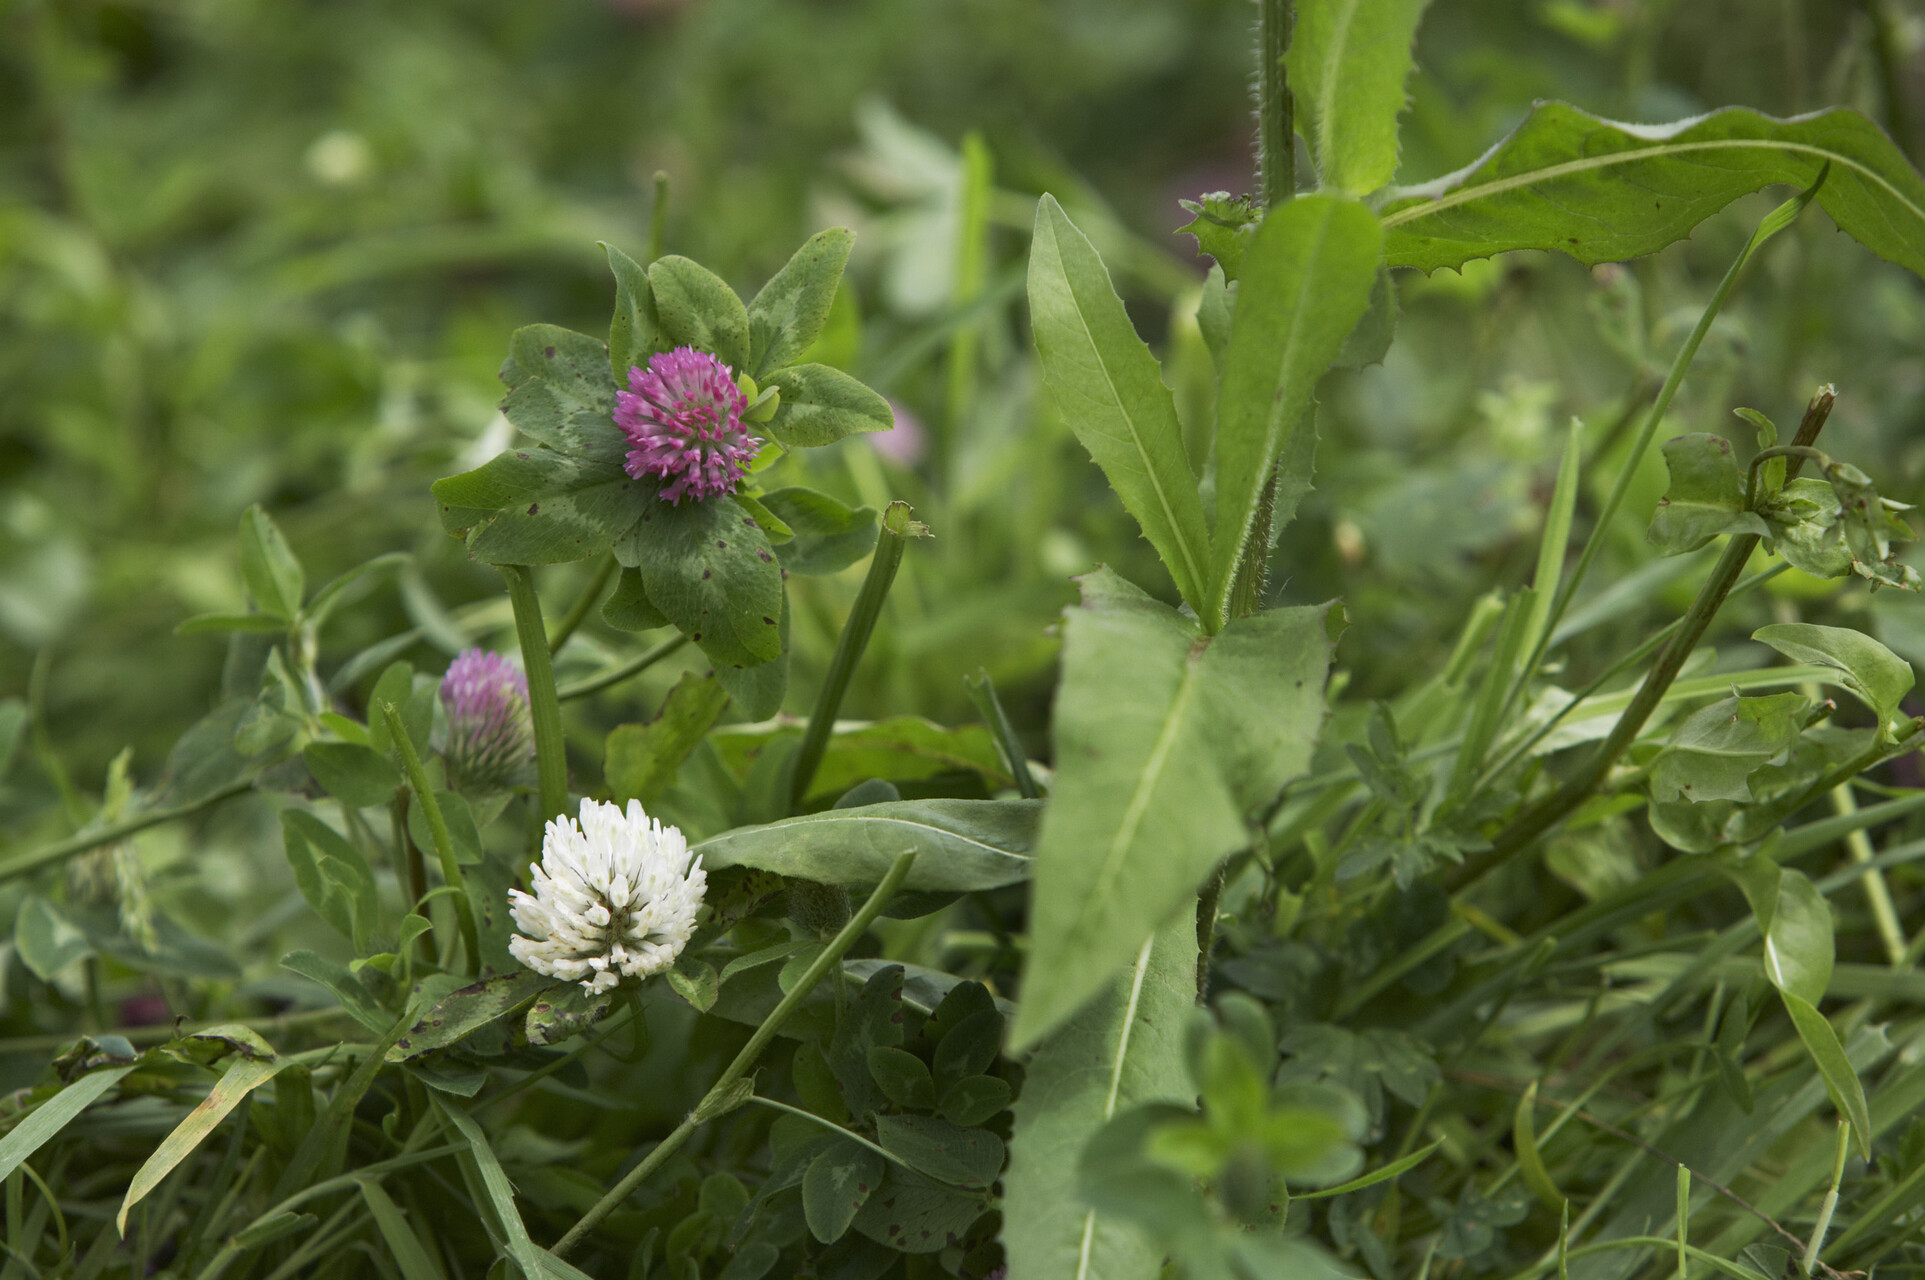 a multi-species sward with red clover and white clover